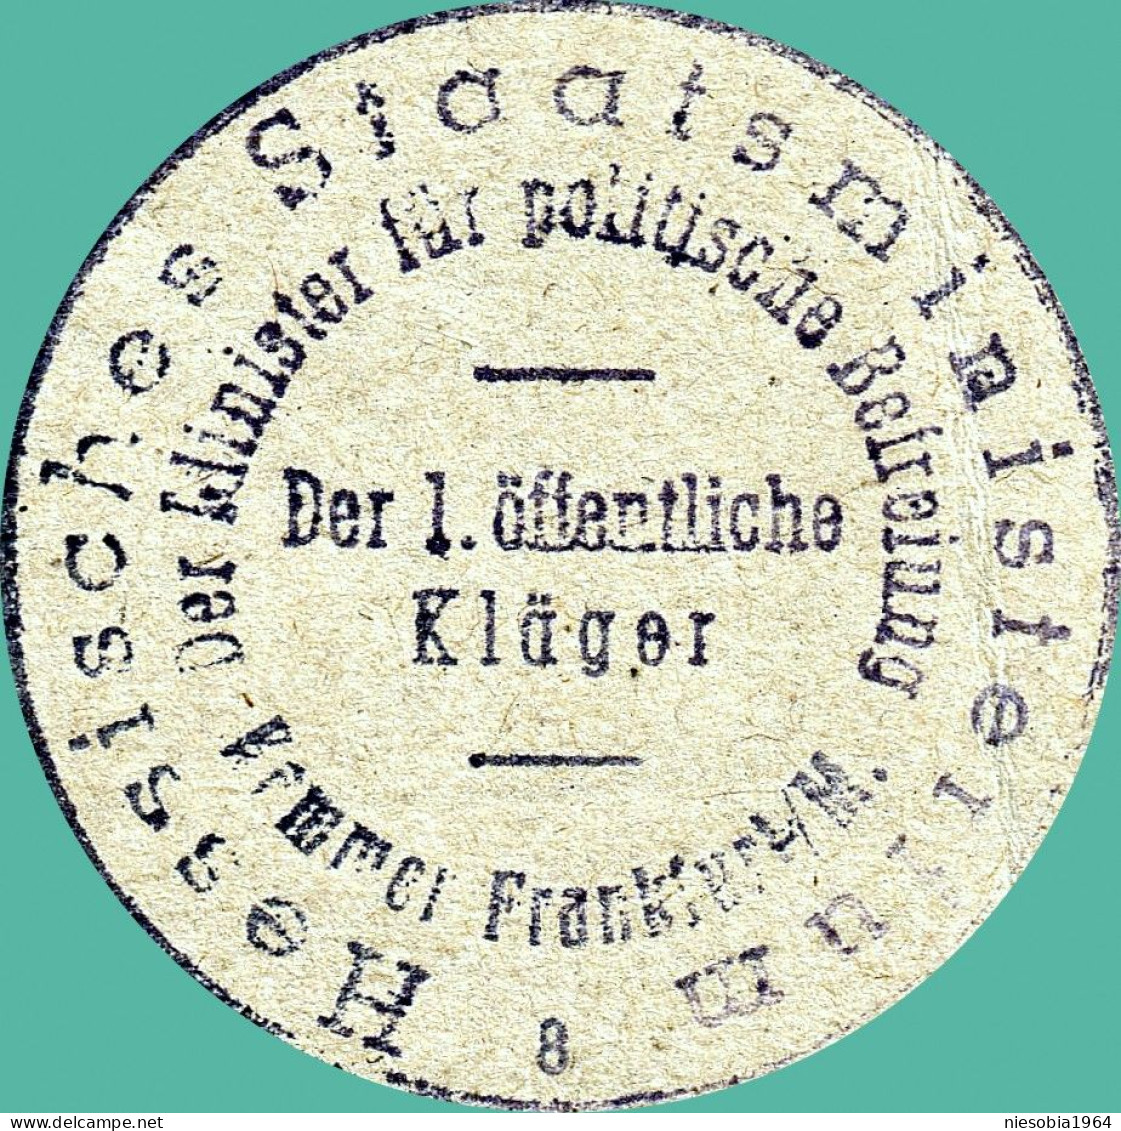 Post Document Releasing The German Karl Schwarz From Any Responsibility For German Nazism And War Crimes. 6 VI 1947 - Lettres & Documents